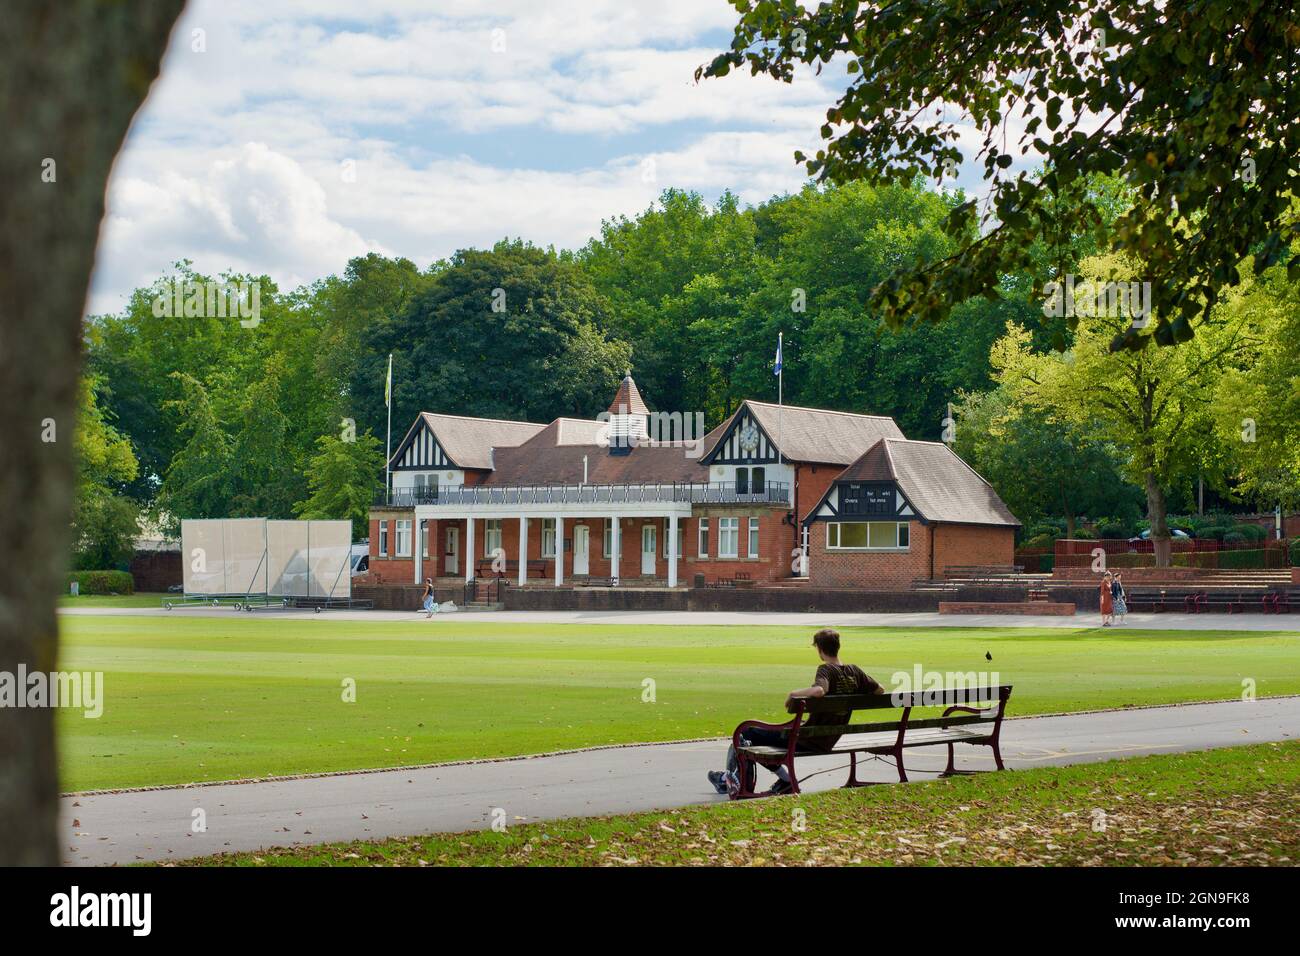 Cricket Pavilion at Queens Park, Queen's Park is a county cricket ground in Chesterfield, Derbyshire. Photo captured in September 2021 Stock Photo